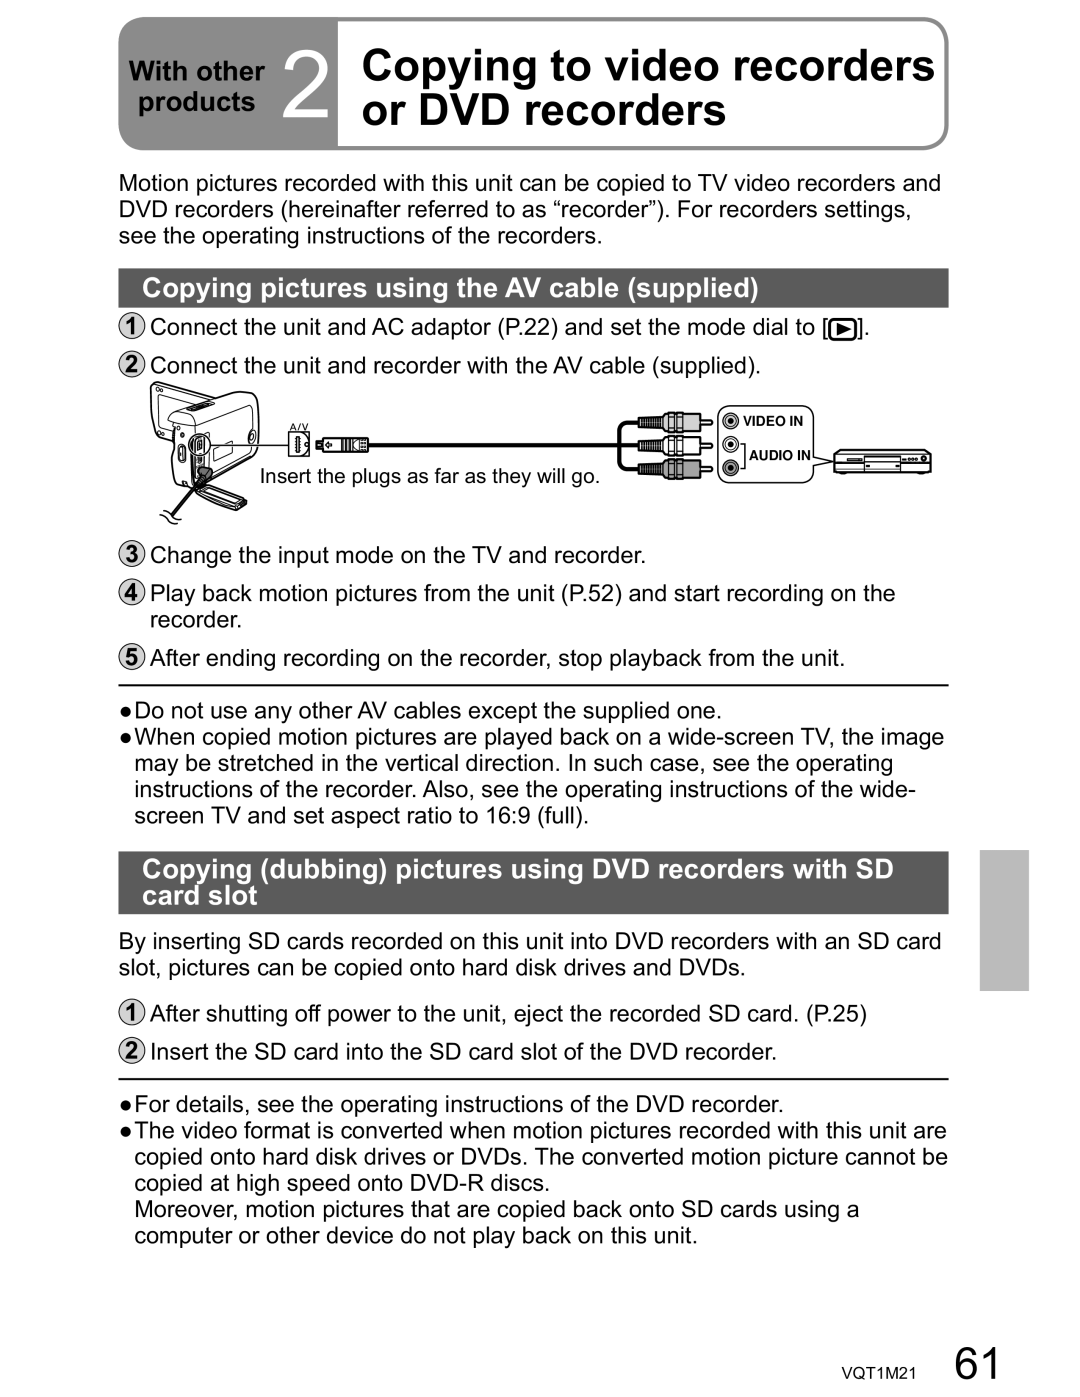 Panasonic SDR-SW20PC operating instructions Copying to video recorders or DVD recorders, With other Products 